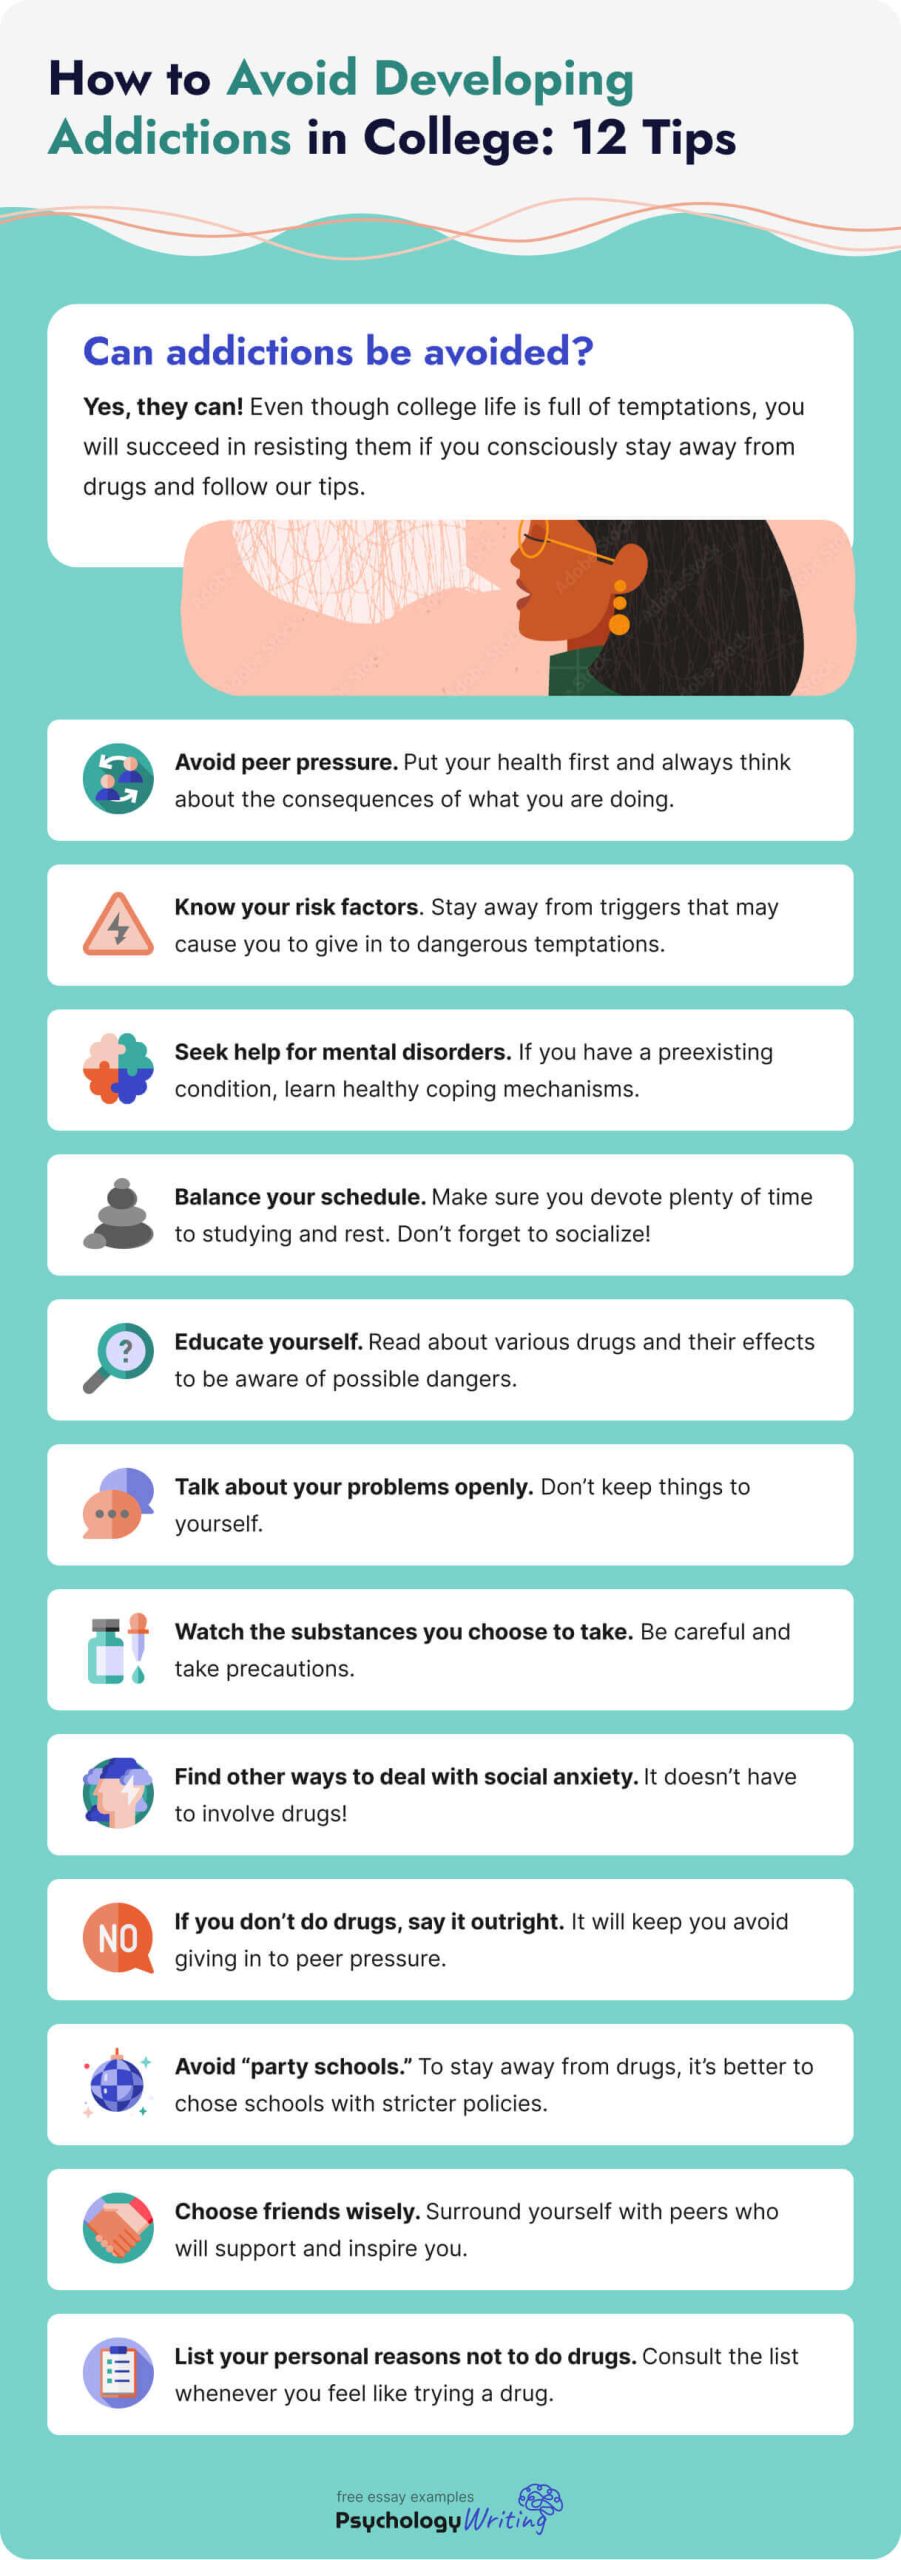 The picture shows 12 tips that can help avoid developing addictions in college.